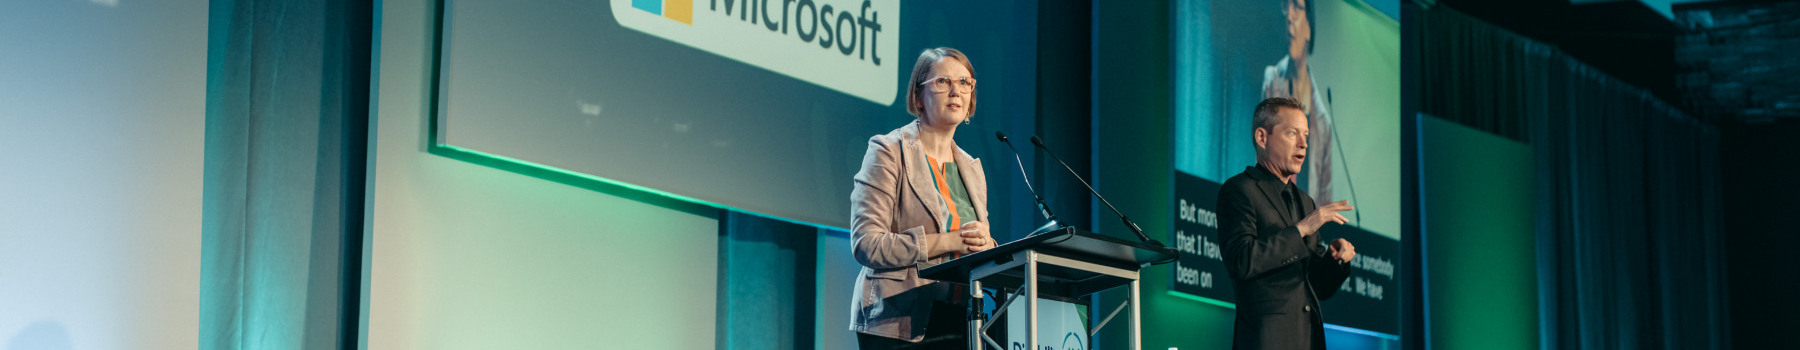 Jenny Lay-Flurrie speaking on stage during the 2019 conference.